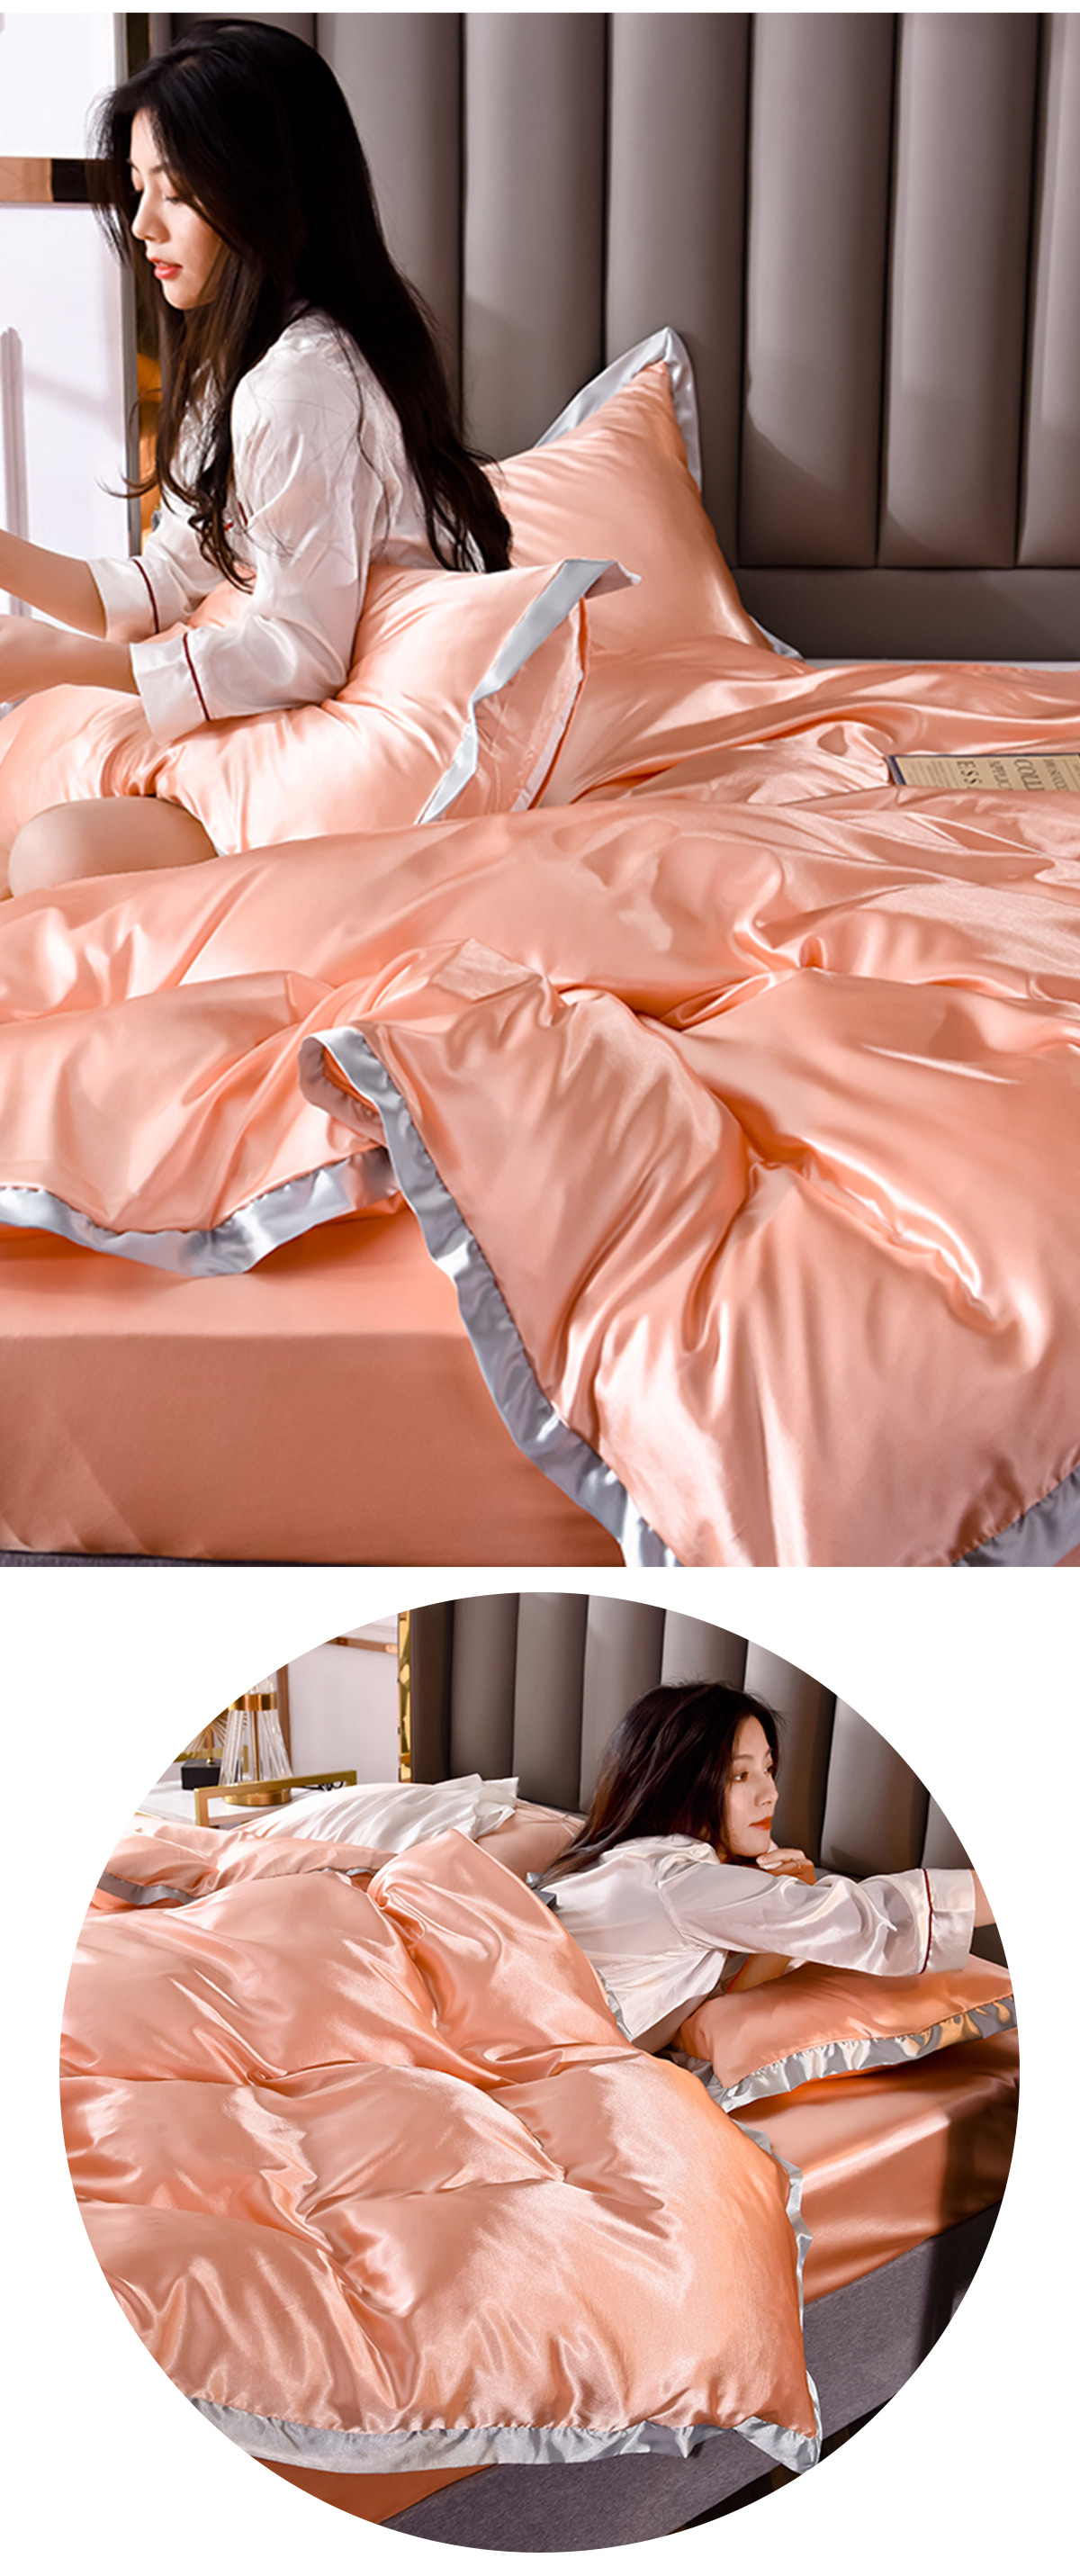 Fresh-and-Soft-Comfortable-Satin-Bed-Cover-Sheet-Set44.jpg